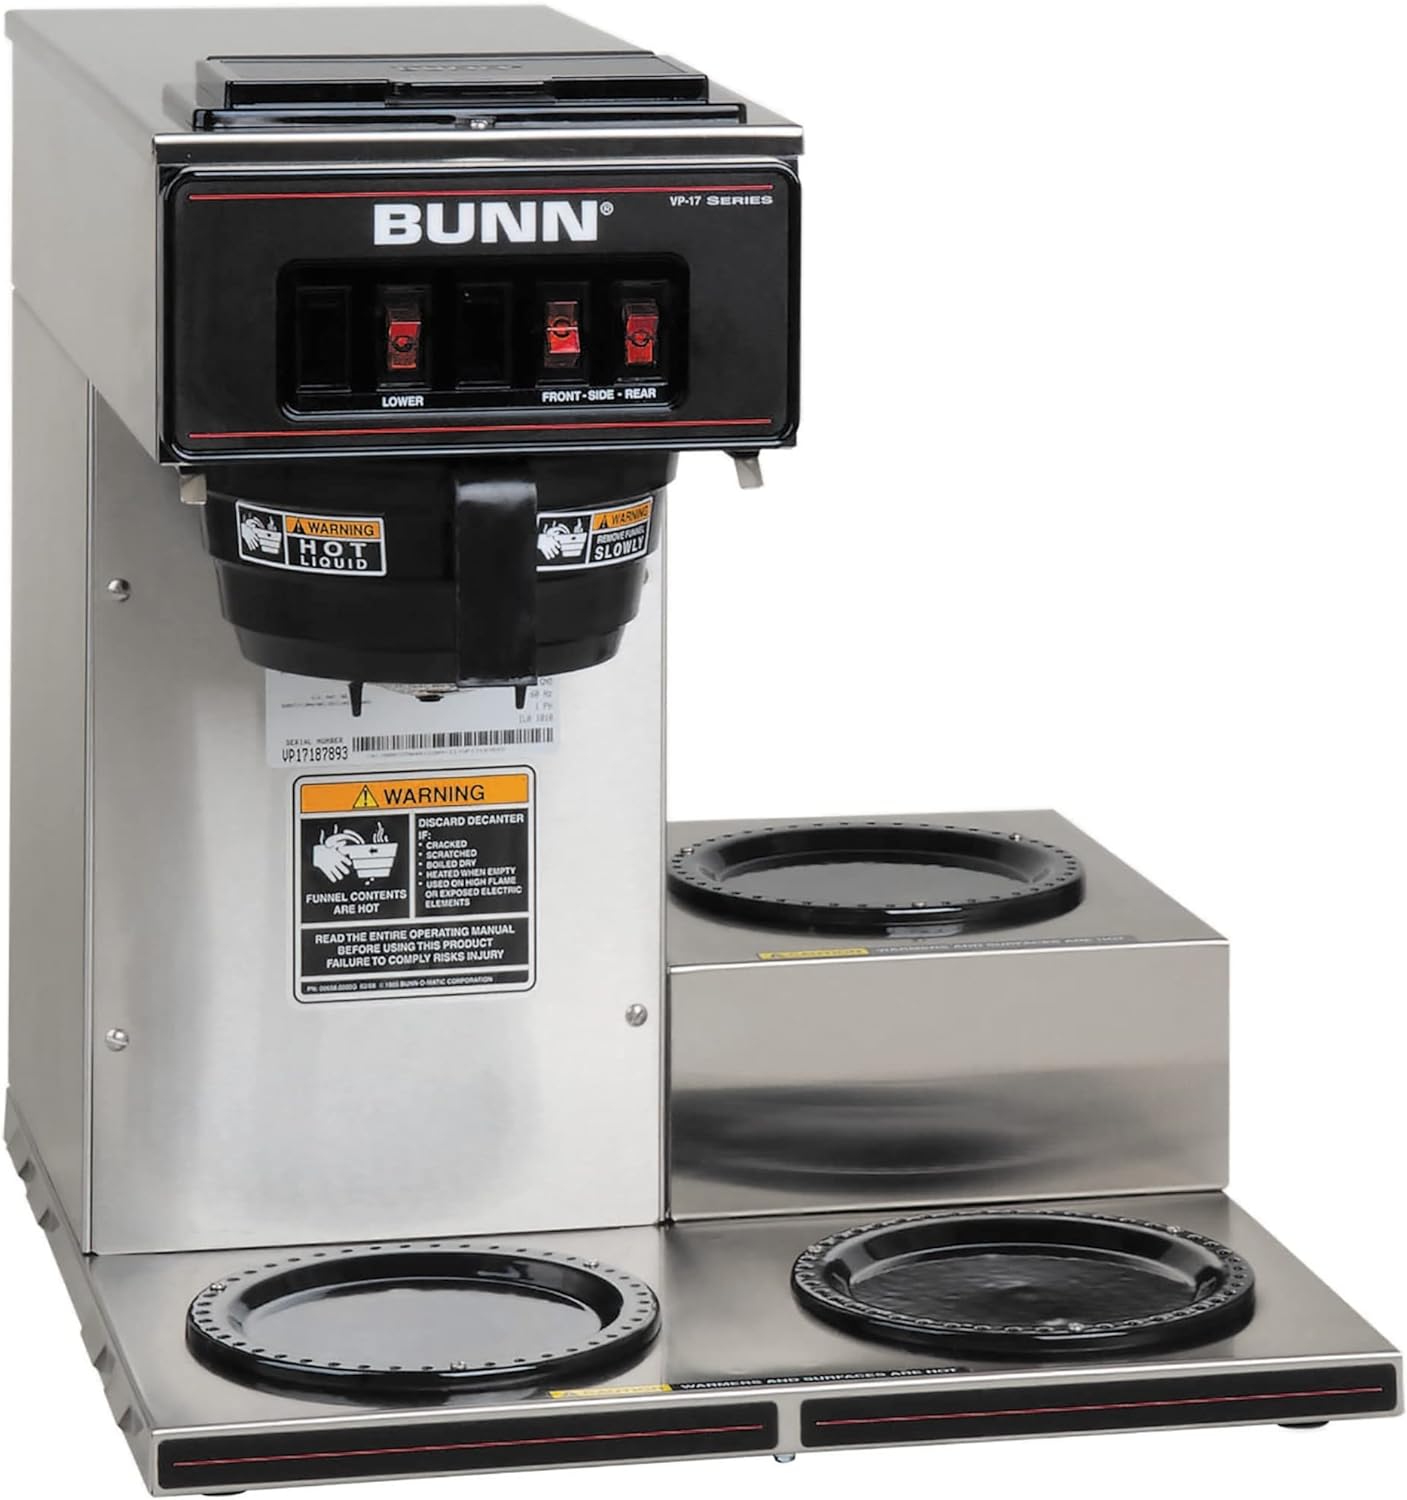 BUNN VP17-3, 12-Cup Low Profile Pourover Commercial Coffee Maker: A Reliable Brewing Solution